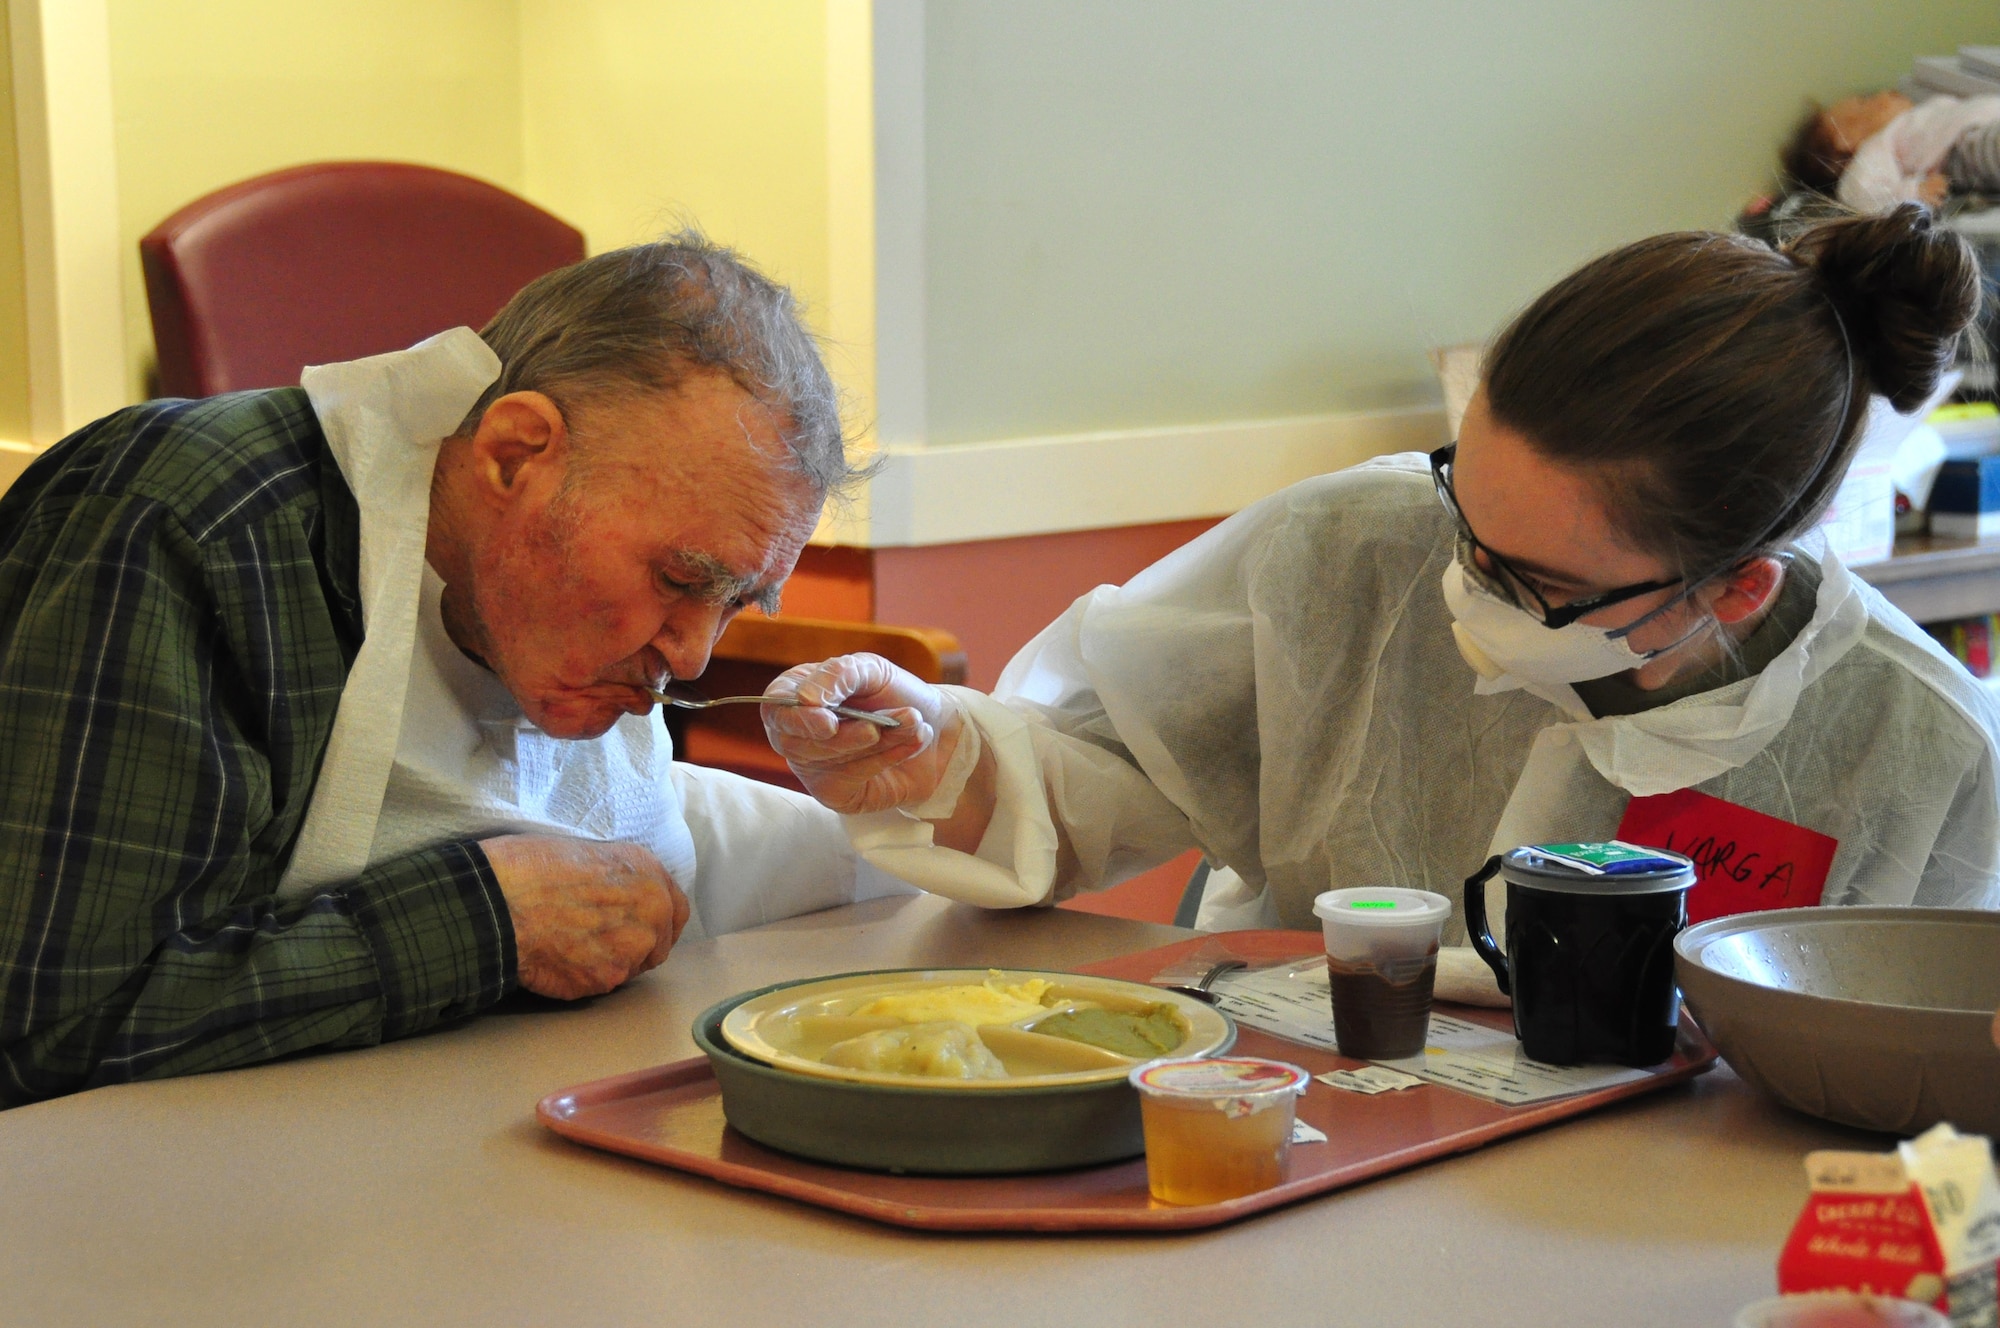 A picture of U.S. Army Pfc. Alexis Varga, a Combat Medic with the 1st Battalion, 114th Infantry Regiment, New Jersey Army National Guard, feeding a resident.